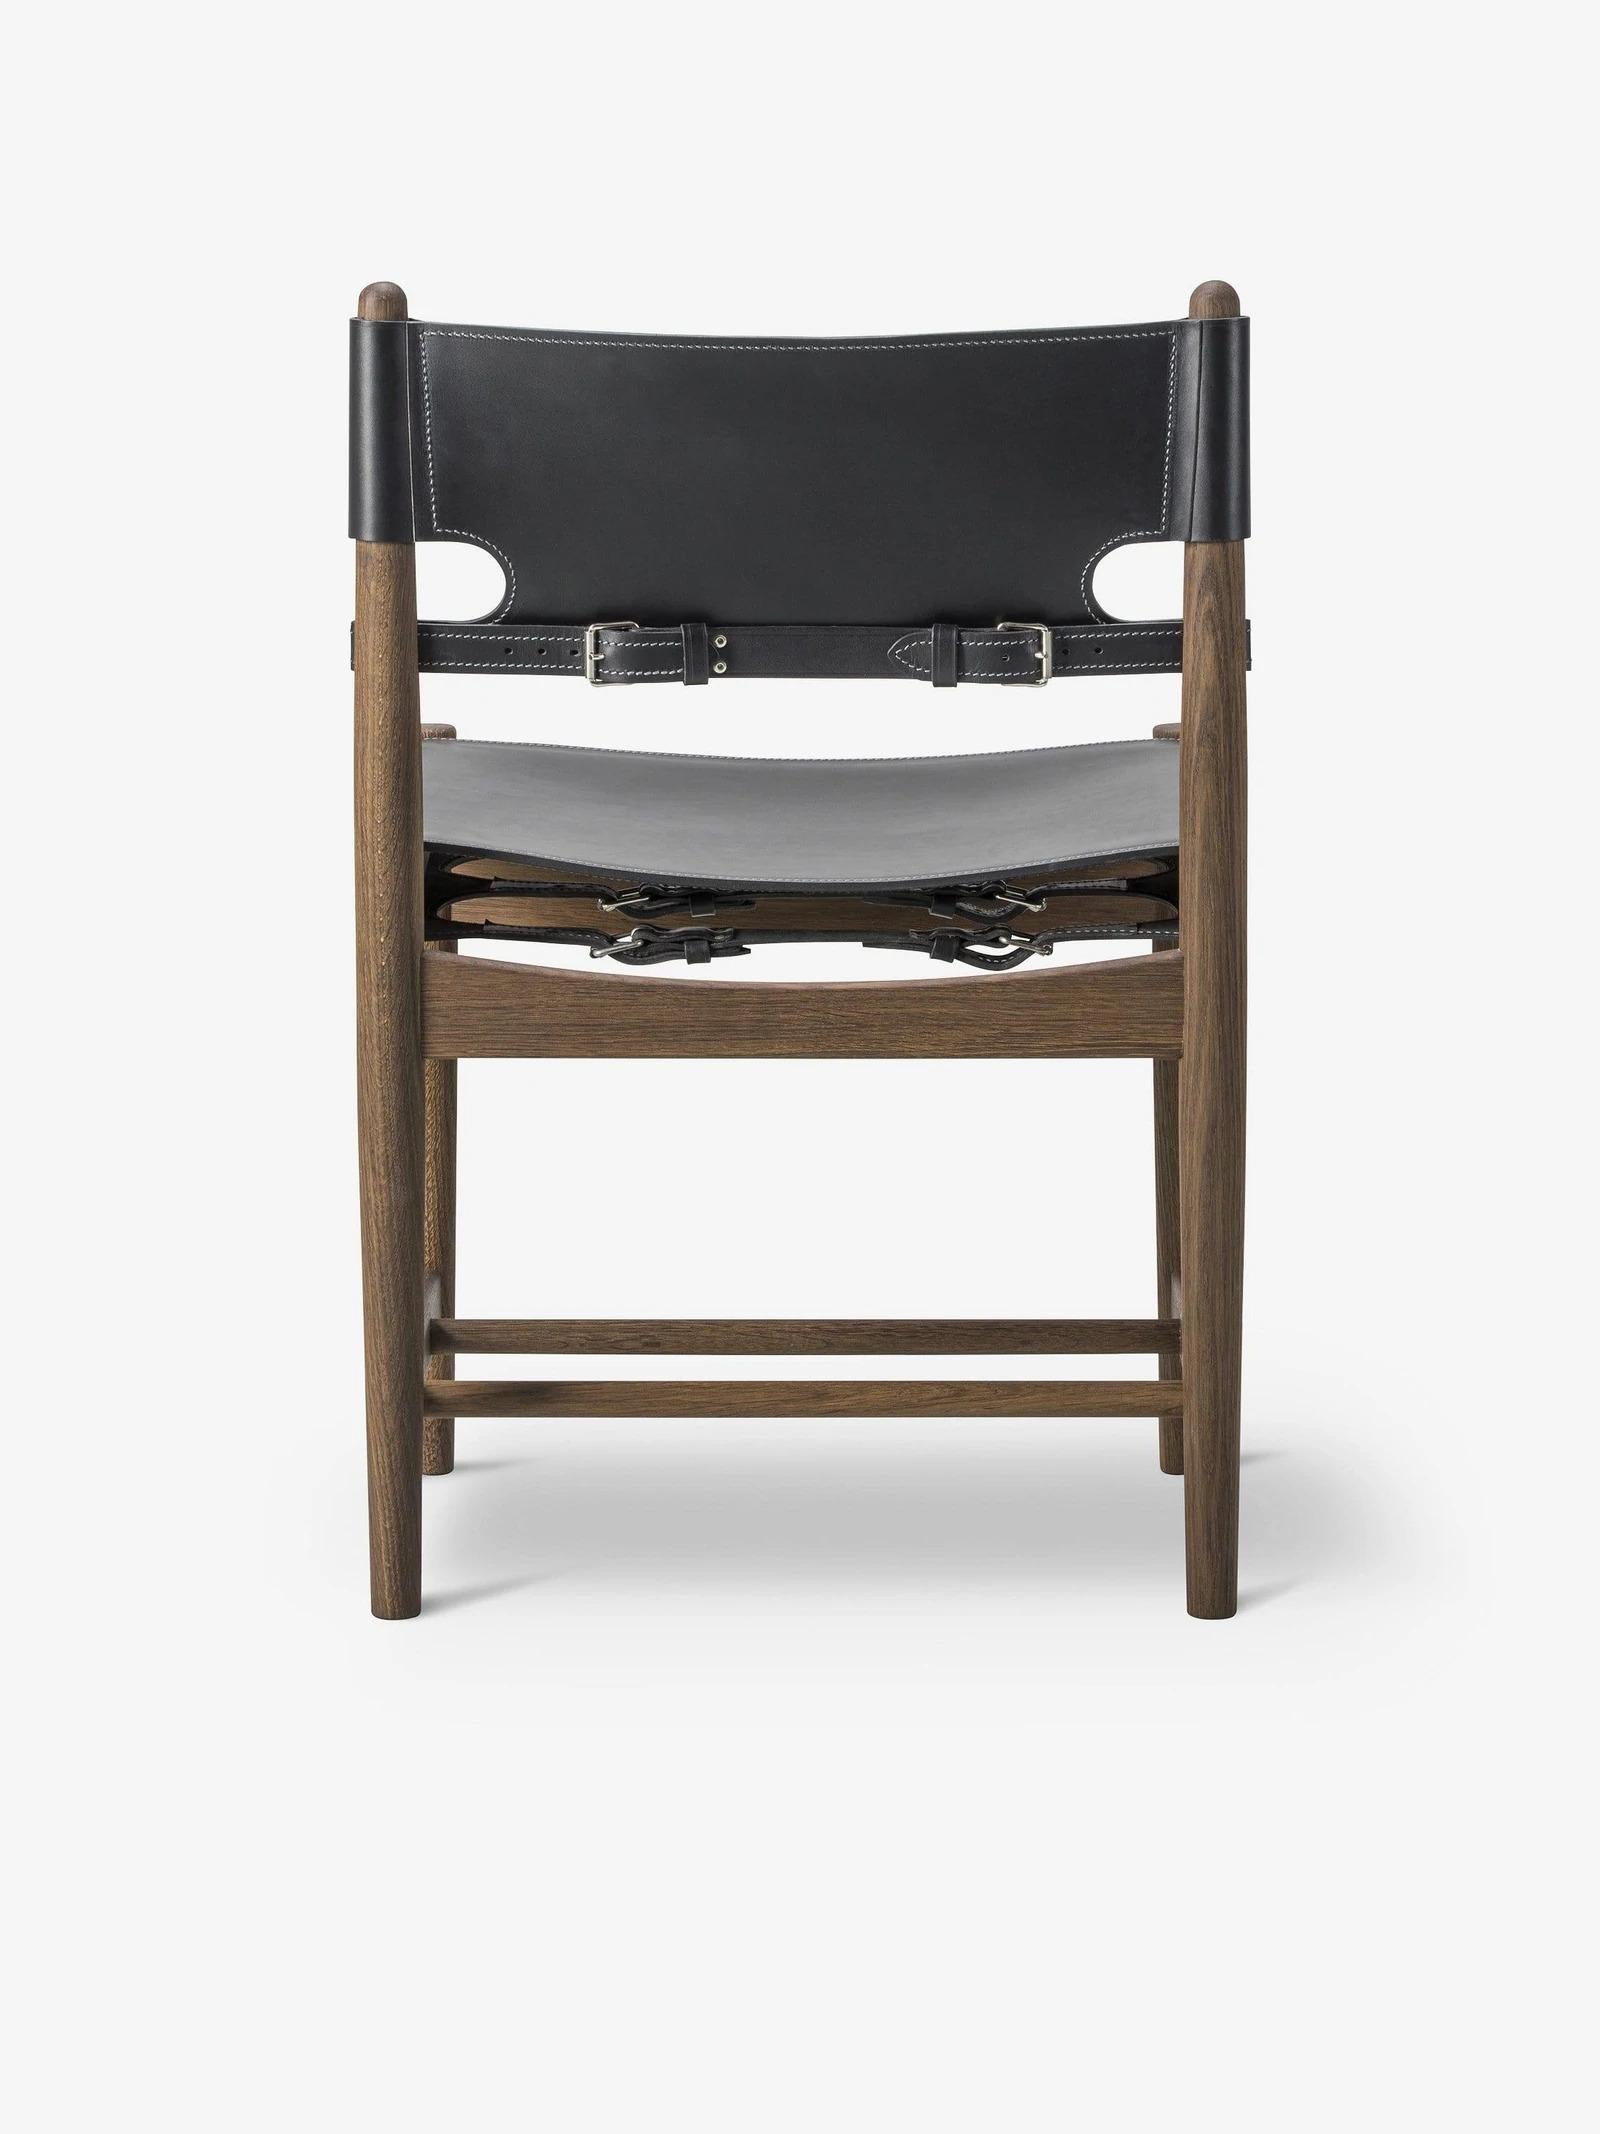 Leather Borge Mogensen Spanish Dining Chair in Smoked Oak For Sale